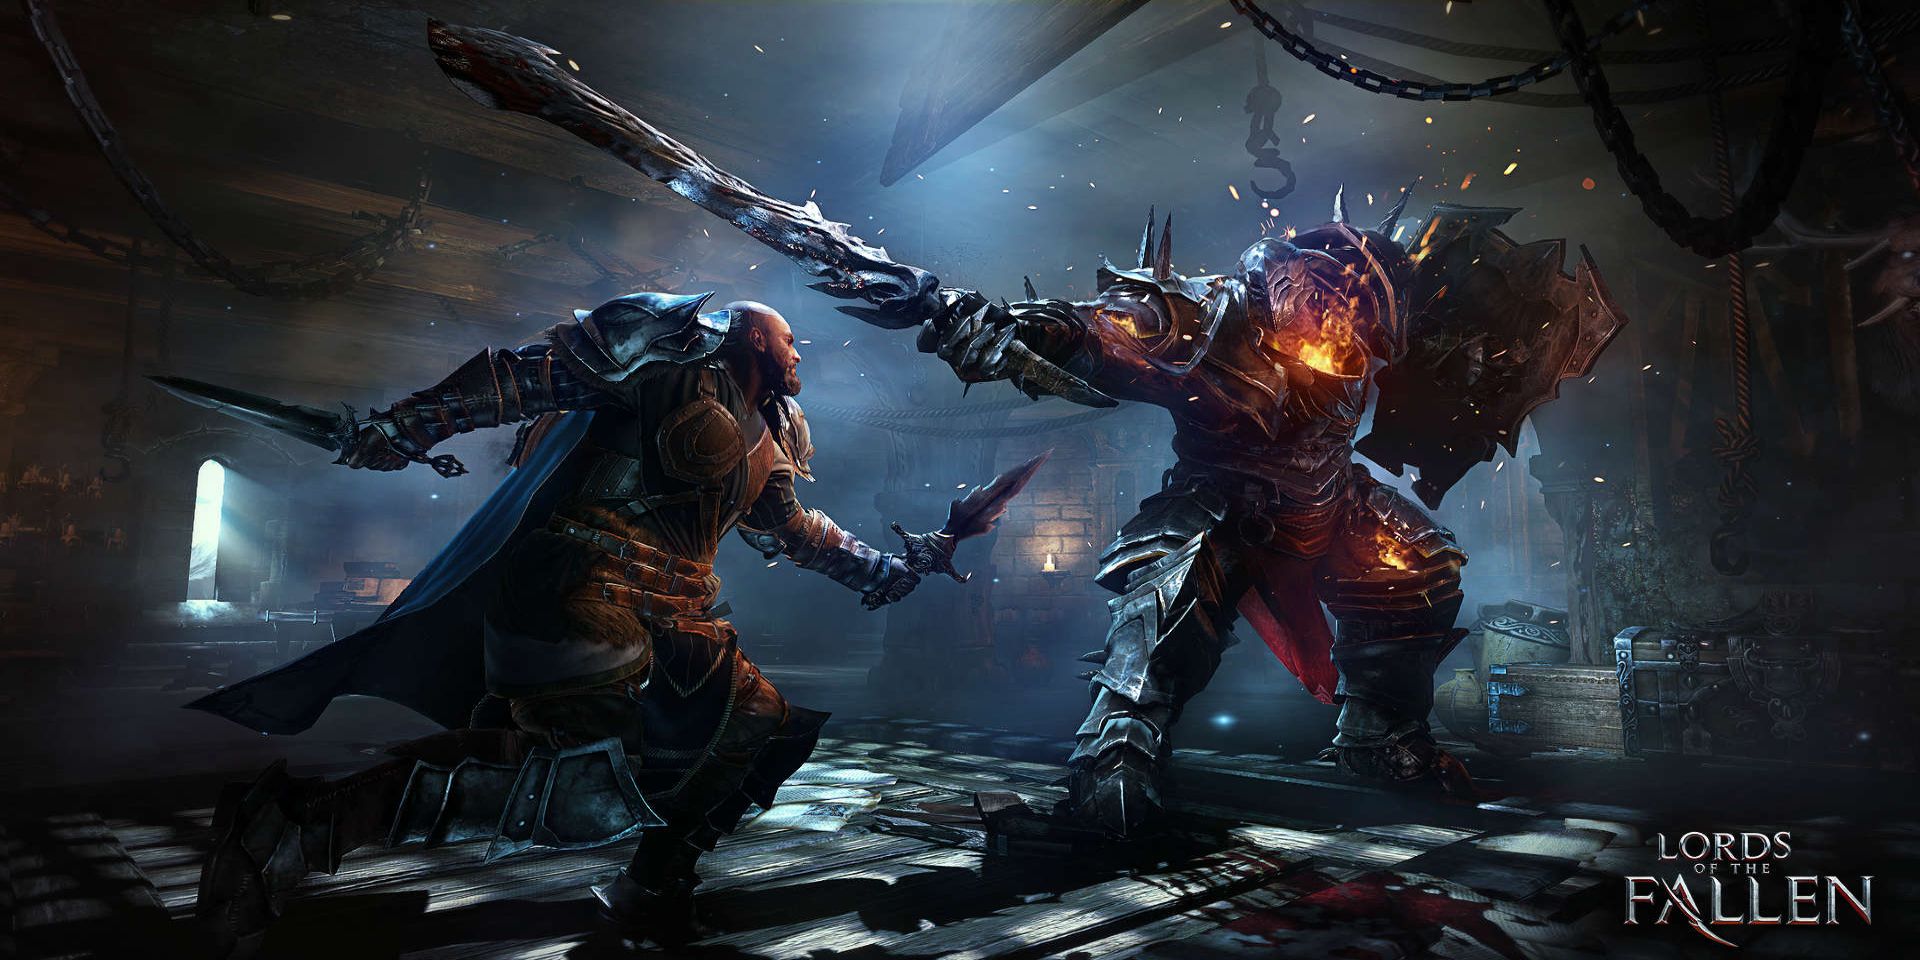 A promotional image for the 2014 video game Lords of the Fallen.